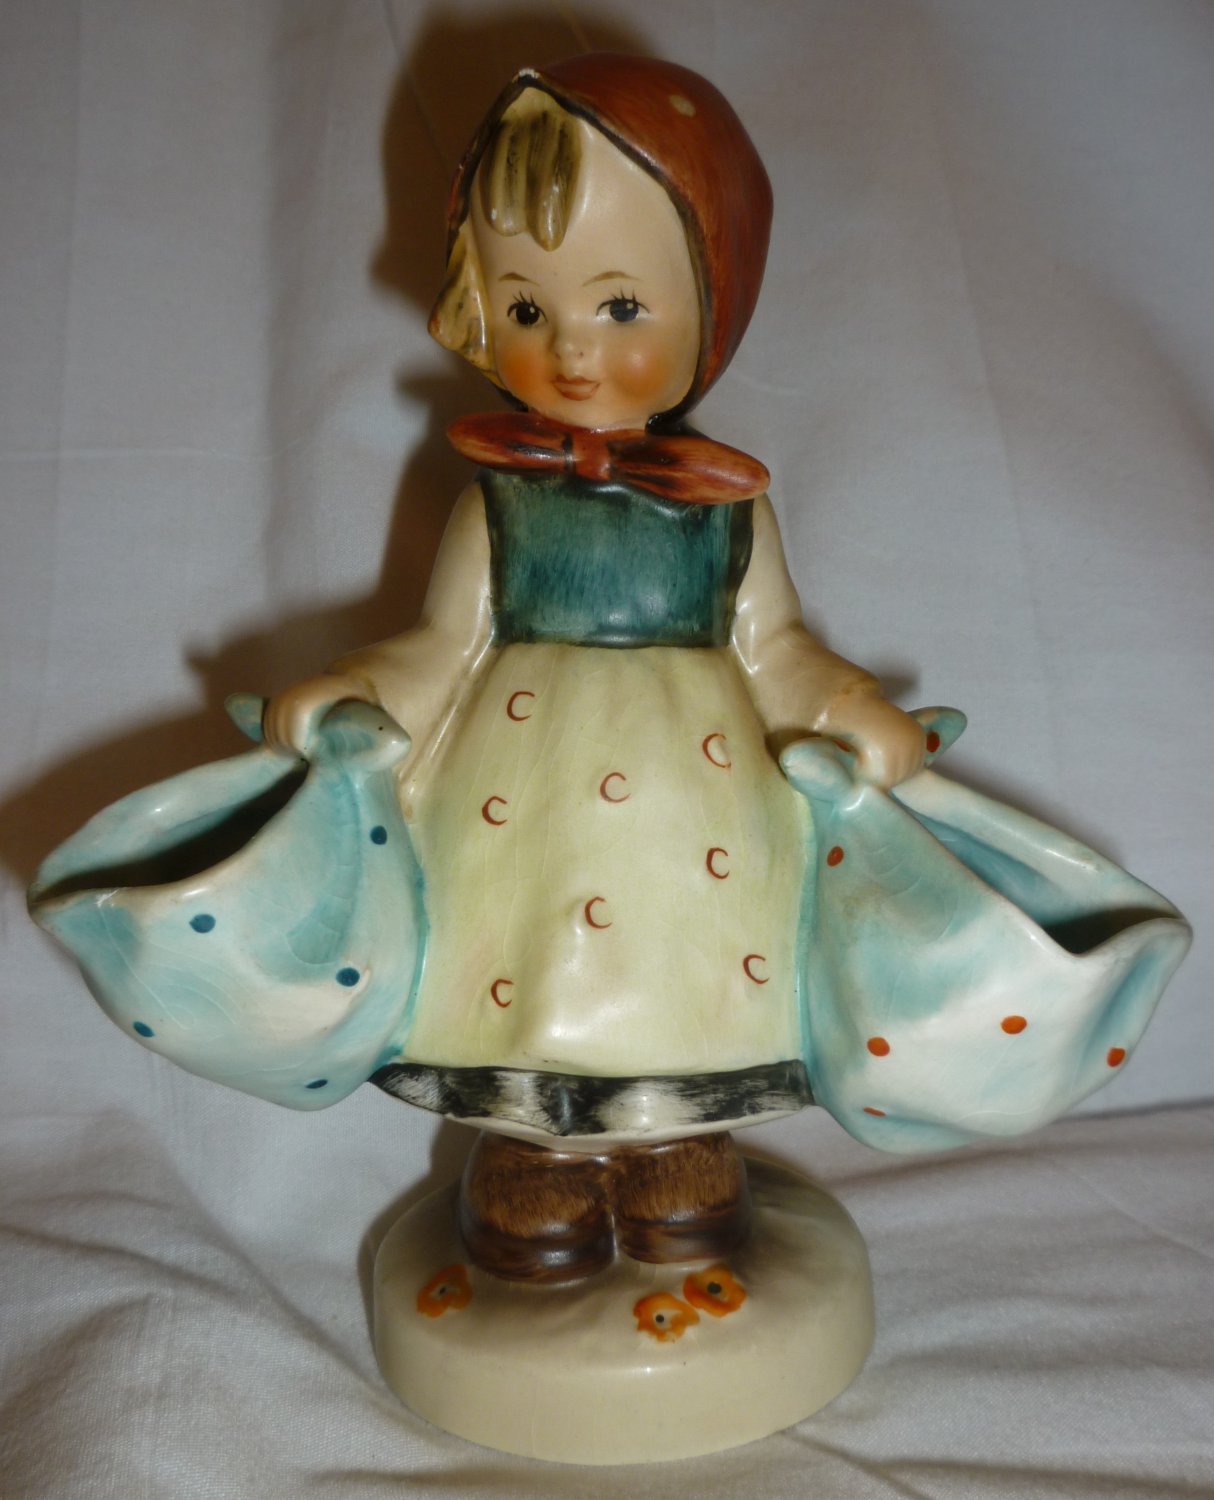 VINTAGE HUMMEL FIGURINE 'MOTHER'S DARLING' LITTLE GIRL WITH BAGS W.GERMANY